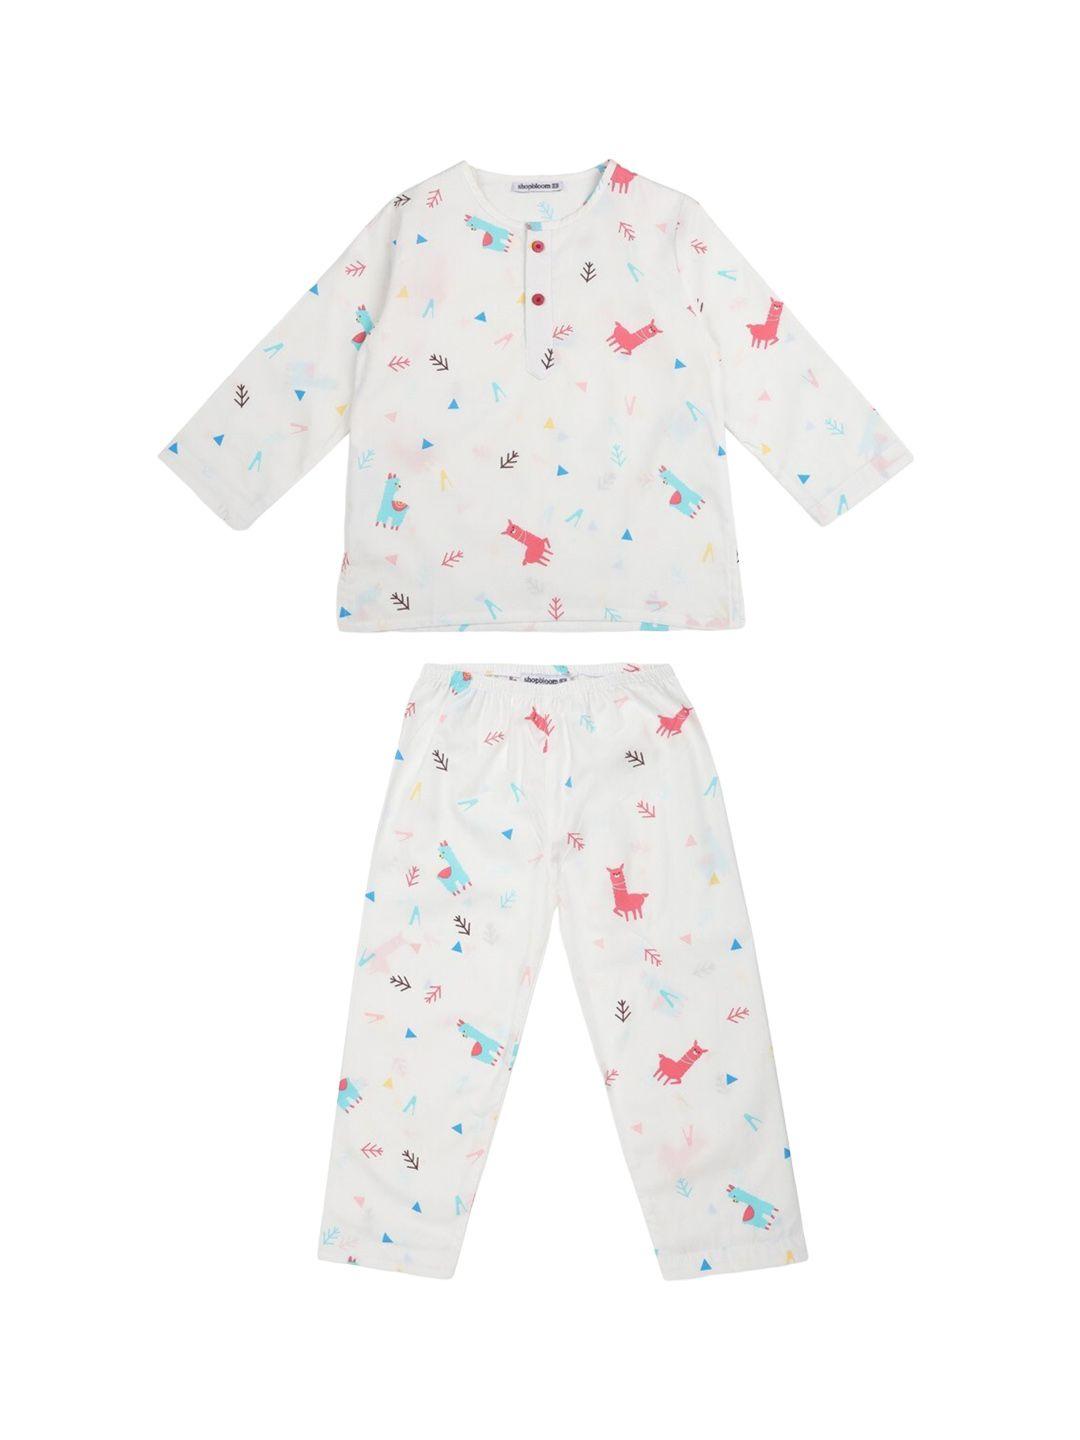 shopbloom kids graphic printed pure cotton top with pyjamas